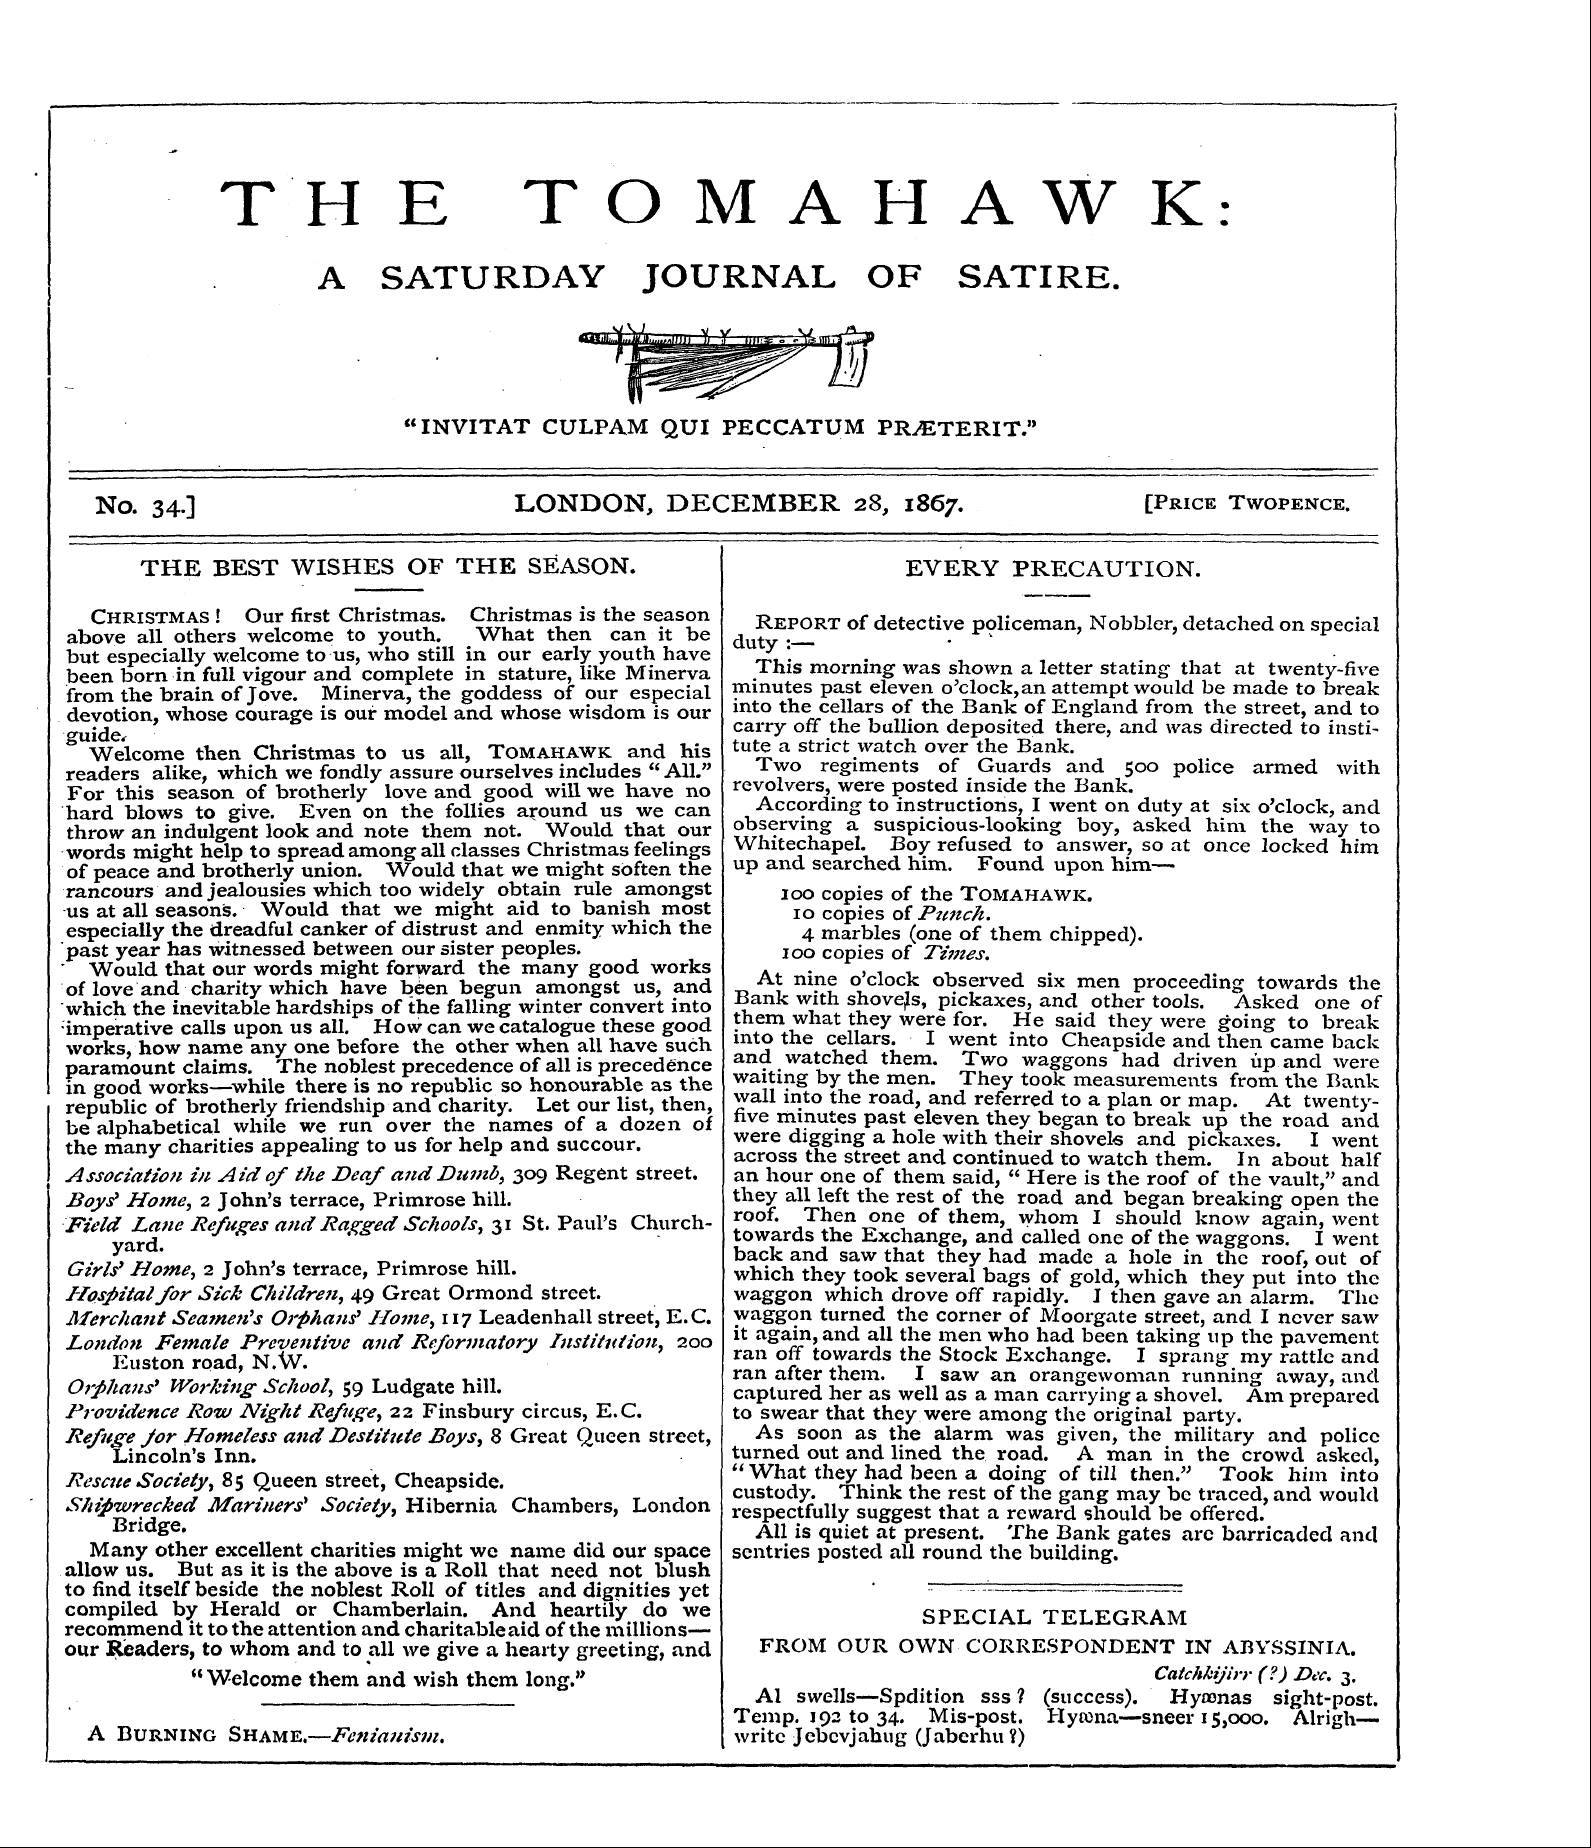 Tomahawk (1867-1870): jS F Y, 1st edition - Special Telegram From Our Own Correspond...